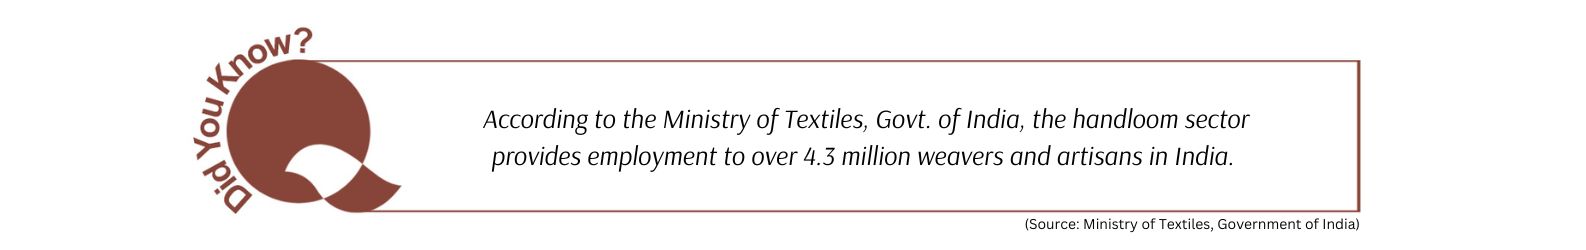 According to the Ministry of Textiles, Govt. of India, the handloom sector provides employment to over 4.3 million weavers and artisans in India. (Source: Ministry of Textiles, Government of India